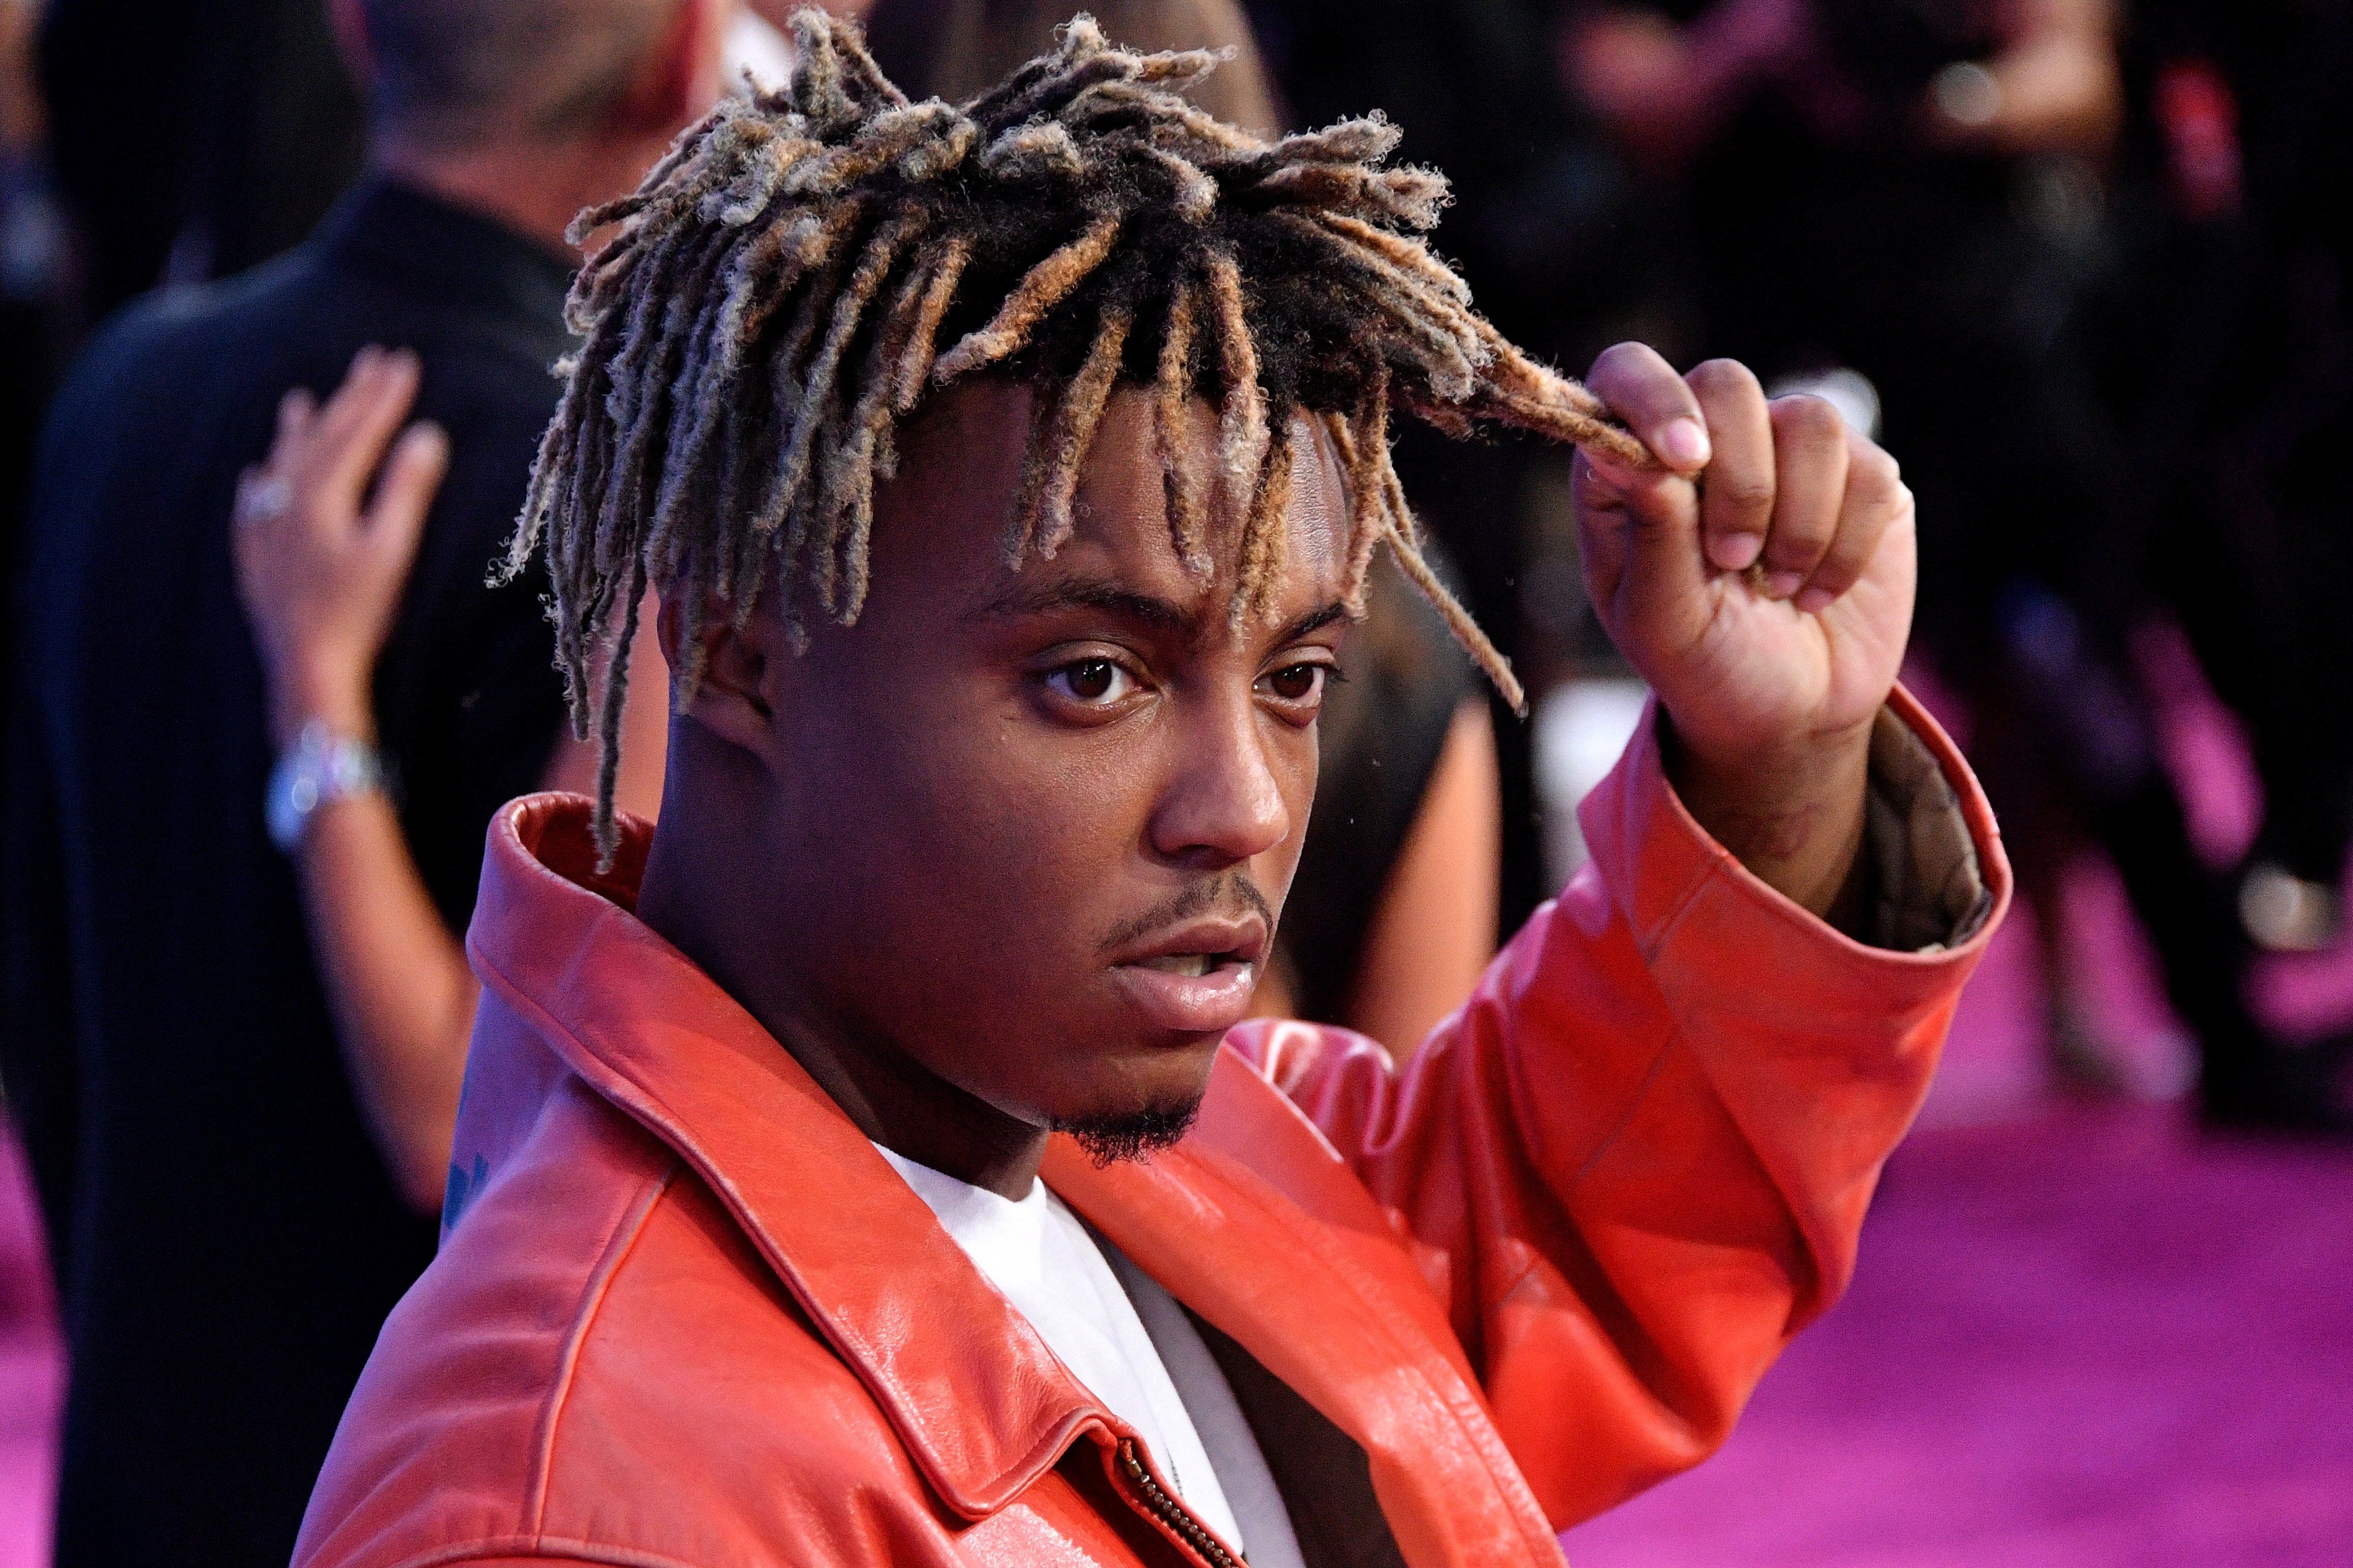 Juice Wrld at the 2018 MTV Video Music Awards at Radio City Music Hall in New York City | Photo: Dipasupil/Getty Images for MTV